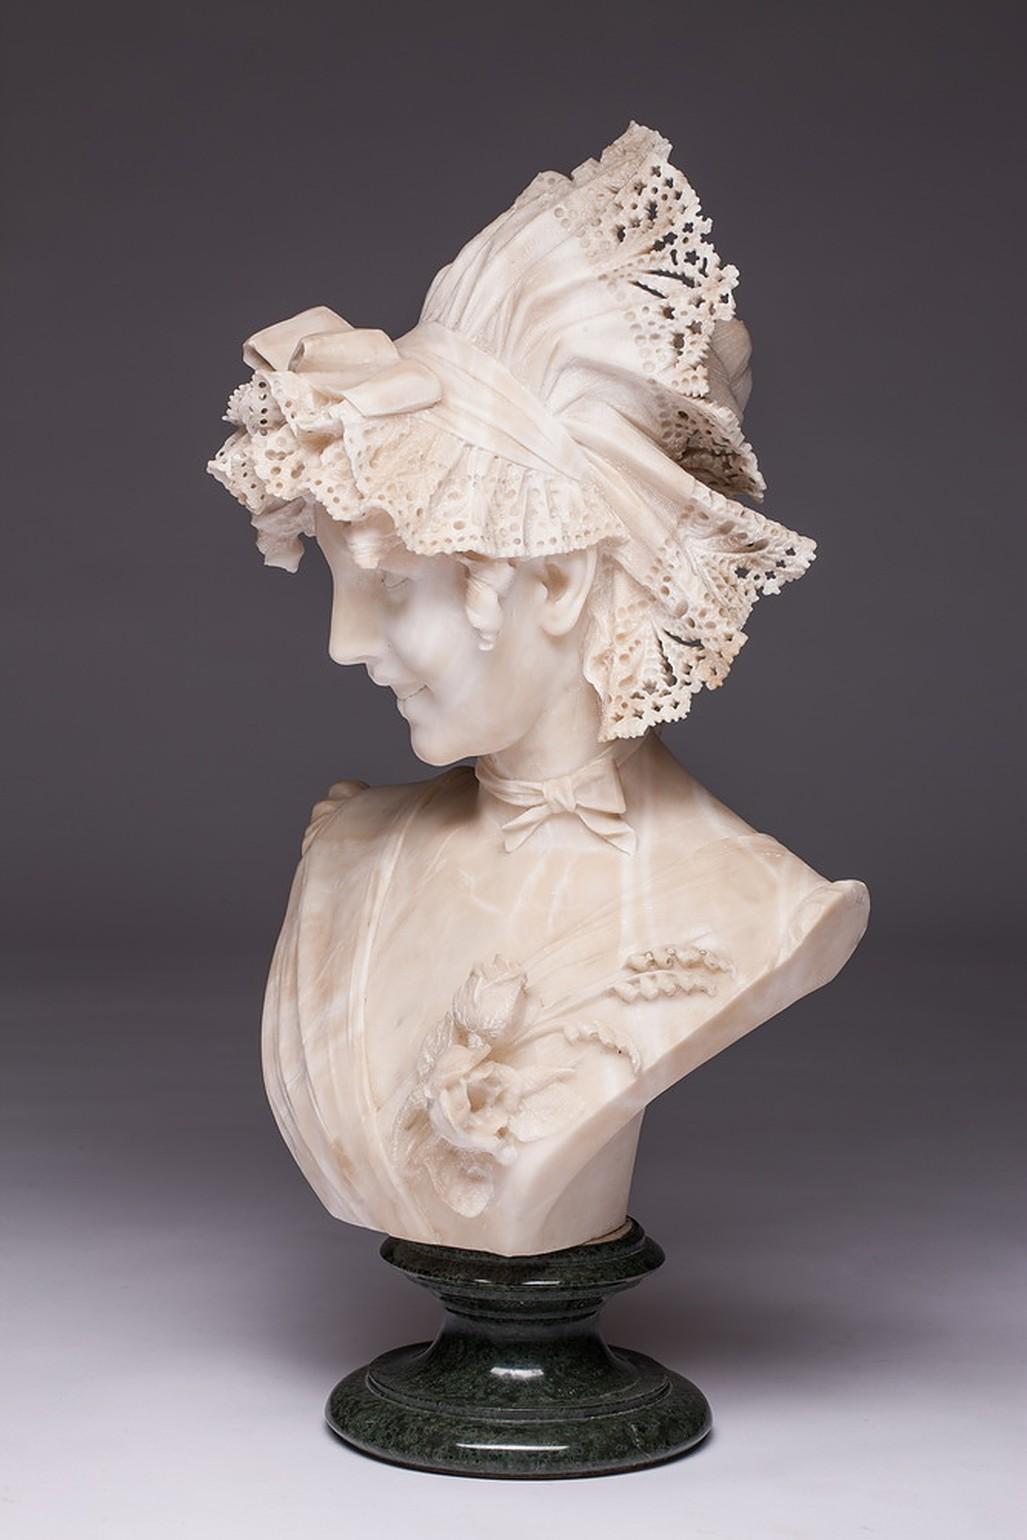 Antique carved Italian female alabaster bust o Ferdinando Vichi, Firenze (1875-1945). Has a little damage on the top of the headwear. A few pieces are missing.
Ferdinando Vichi was born in Florence in 1875 and died there in 1941. He was well-known